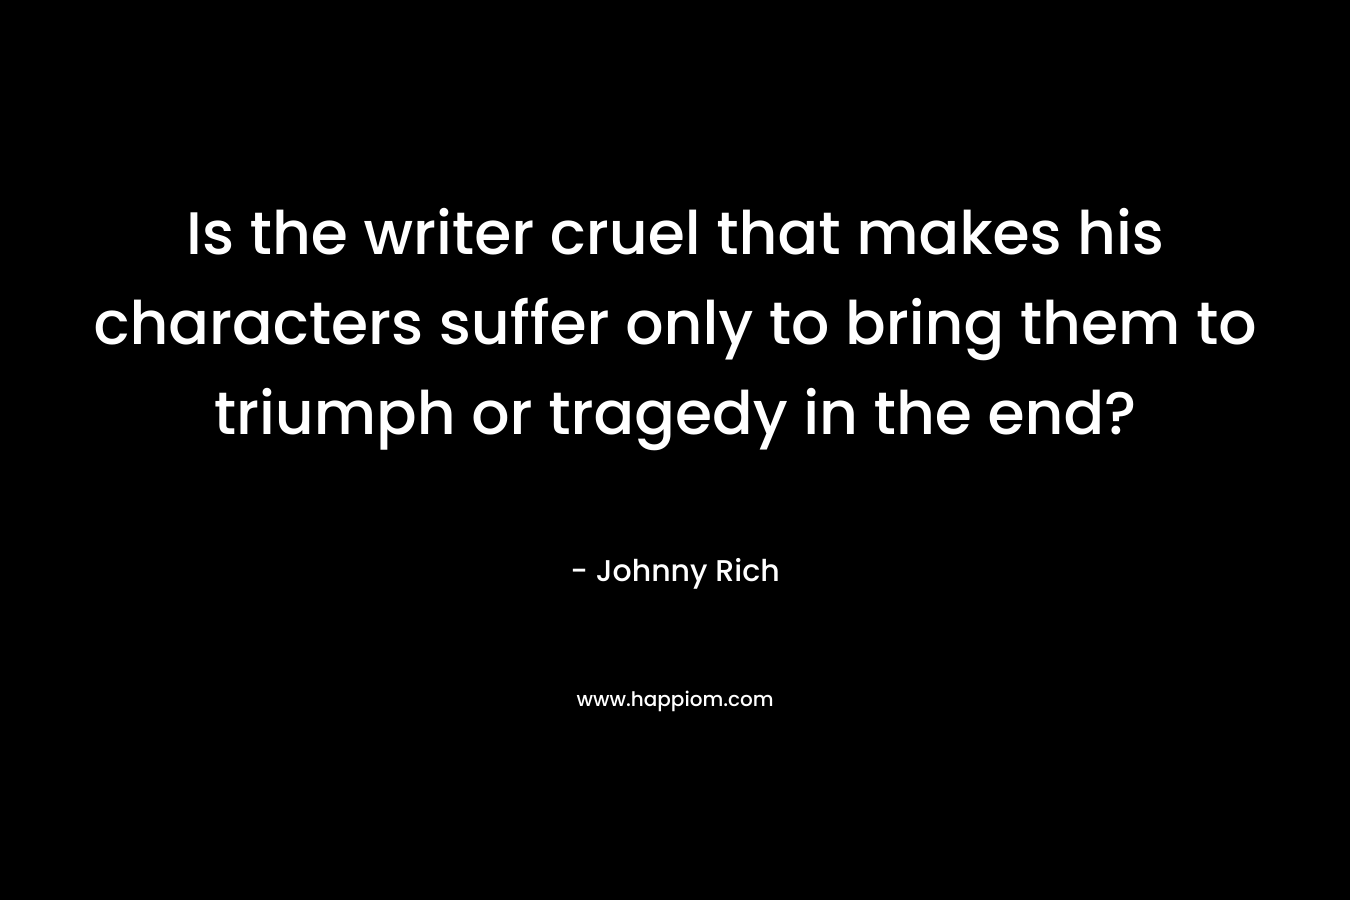 Is the writer cruel that makes his characters suffer only to bring them to triumph or tragedy in the end?